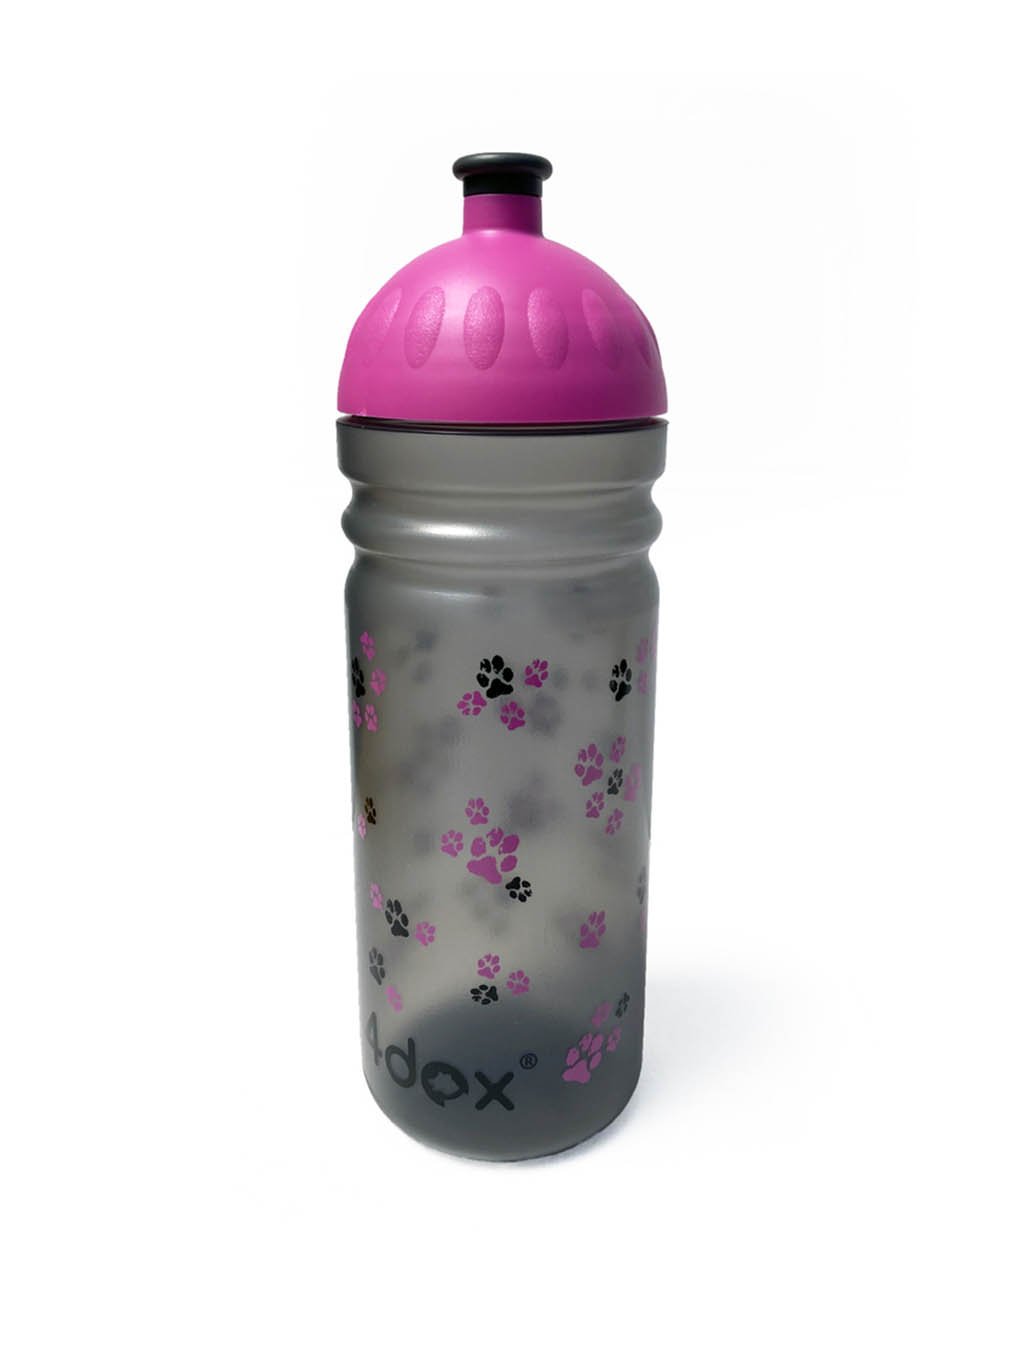 Bottle with pink paws